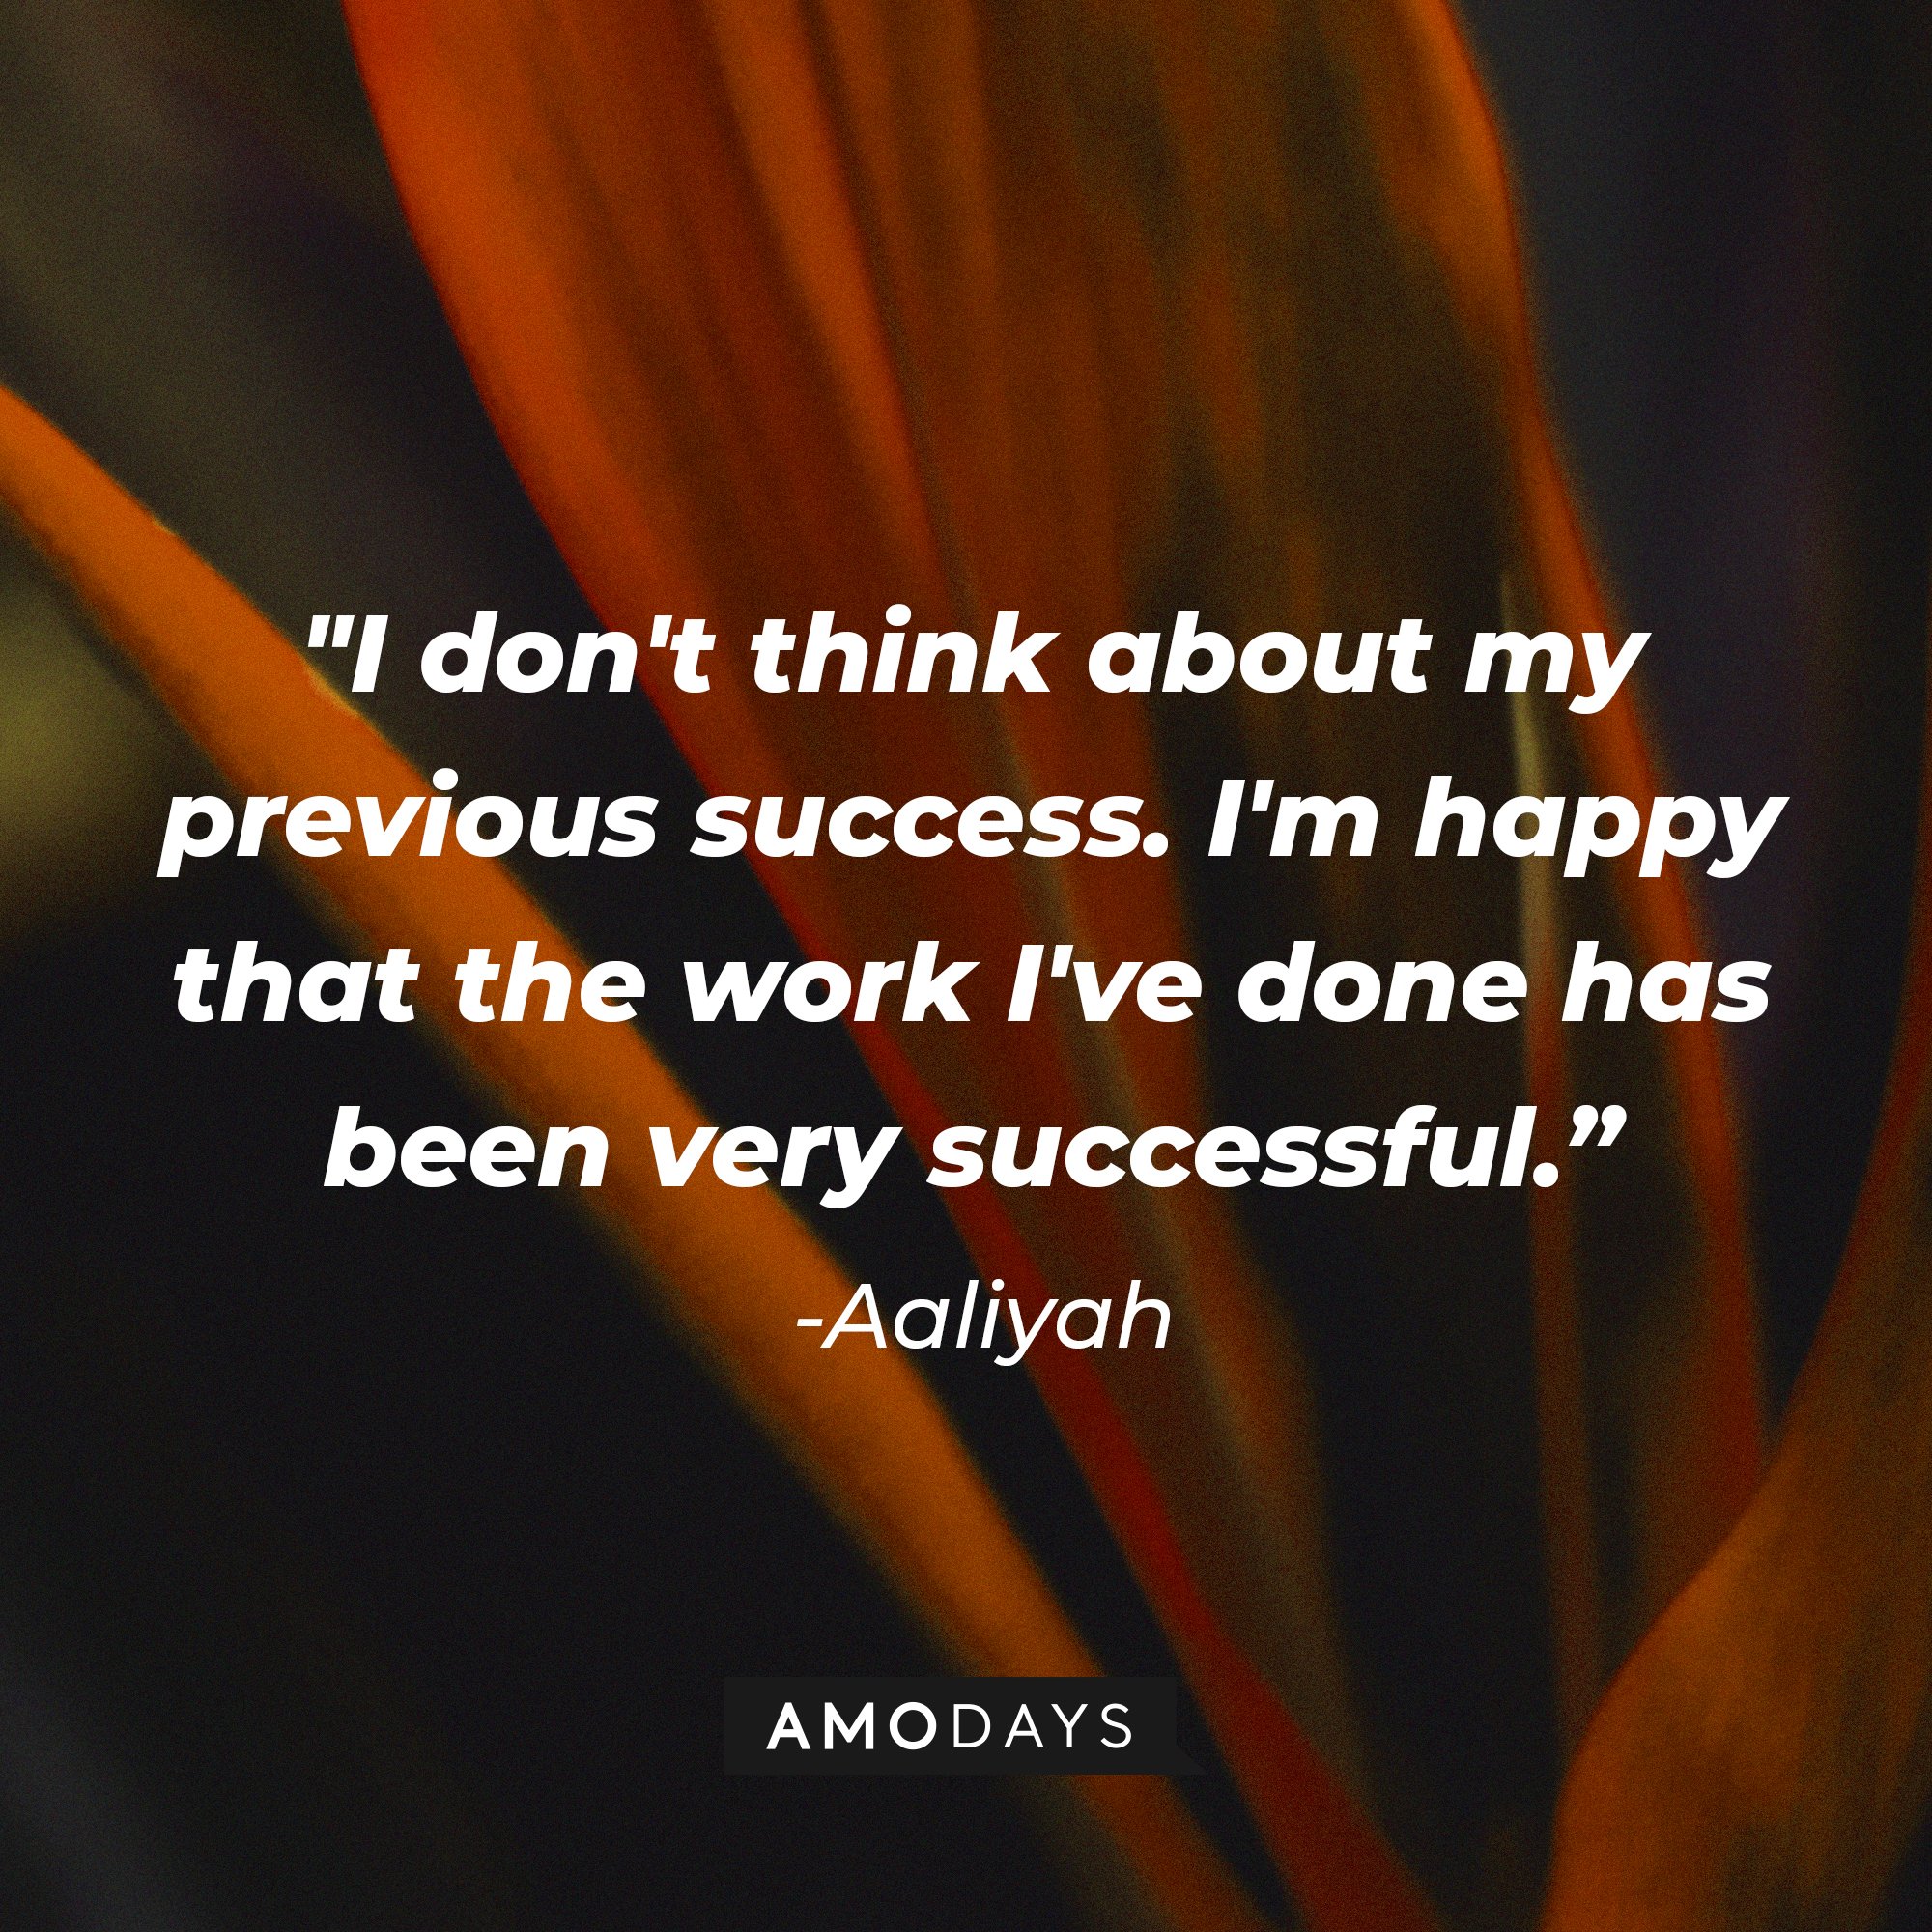 Aaliyah’s quote: "I don't think about my previous success. I'm happy that the work I've done has been very successful." | Image: AmoDays